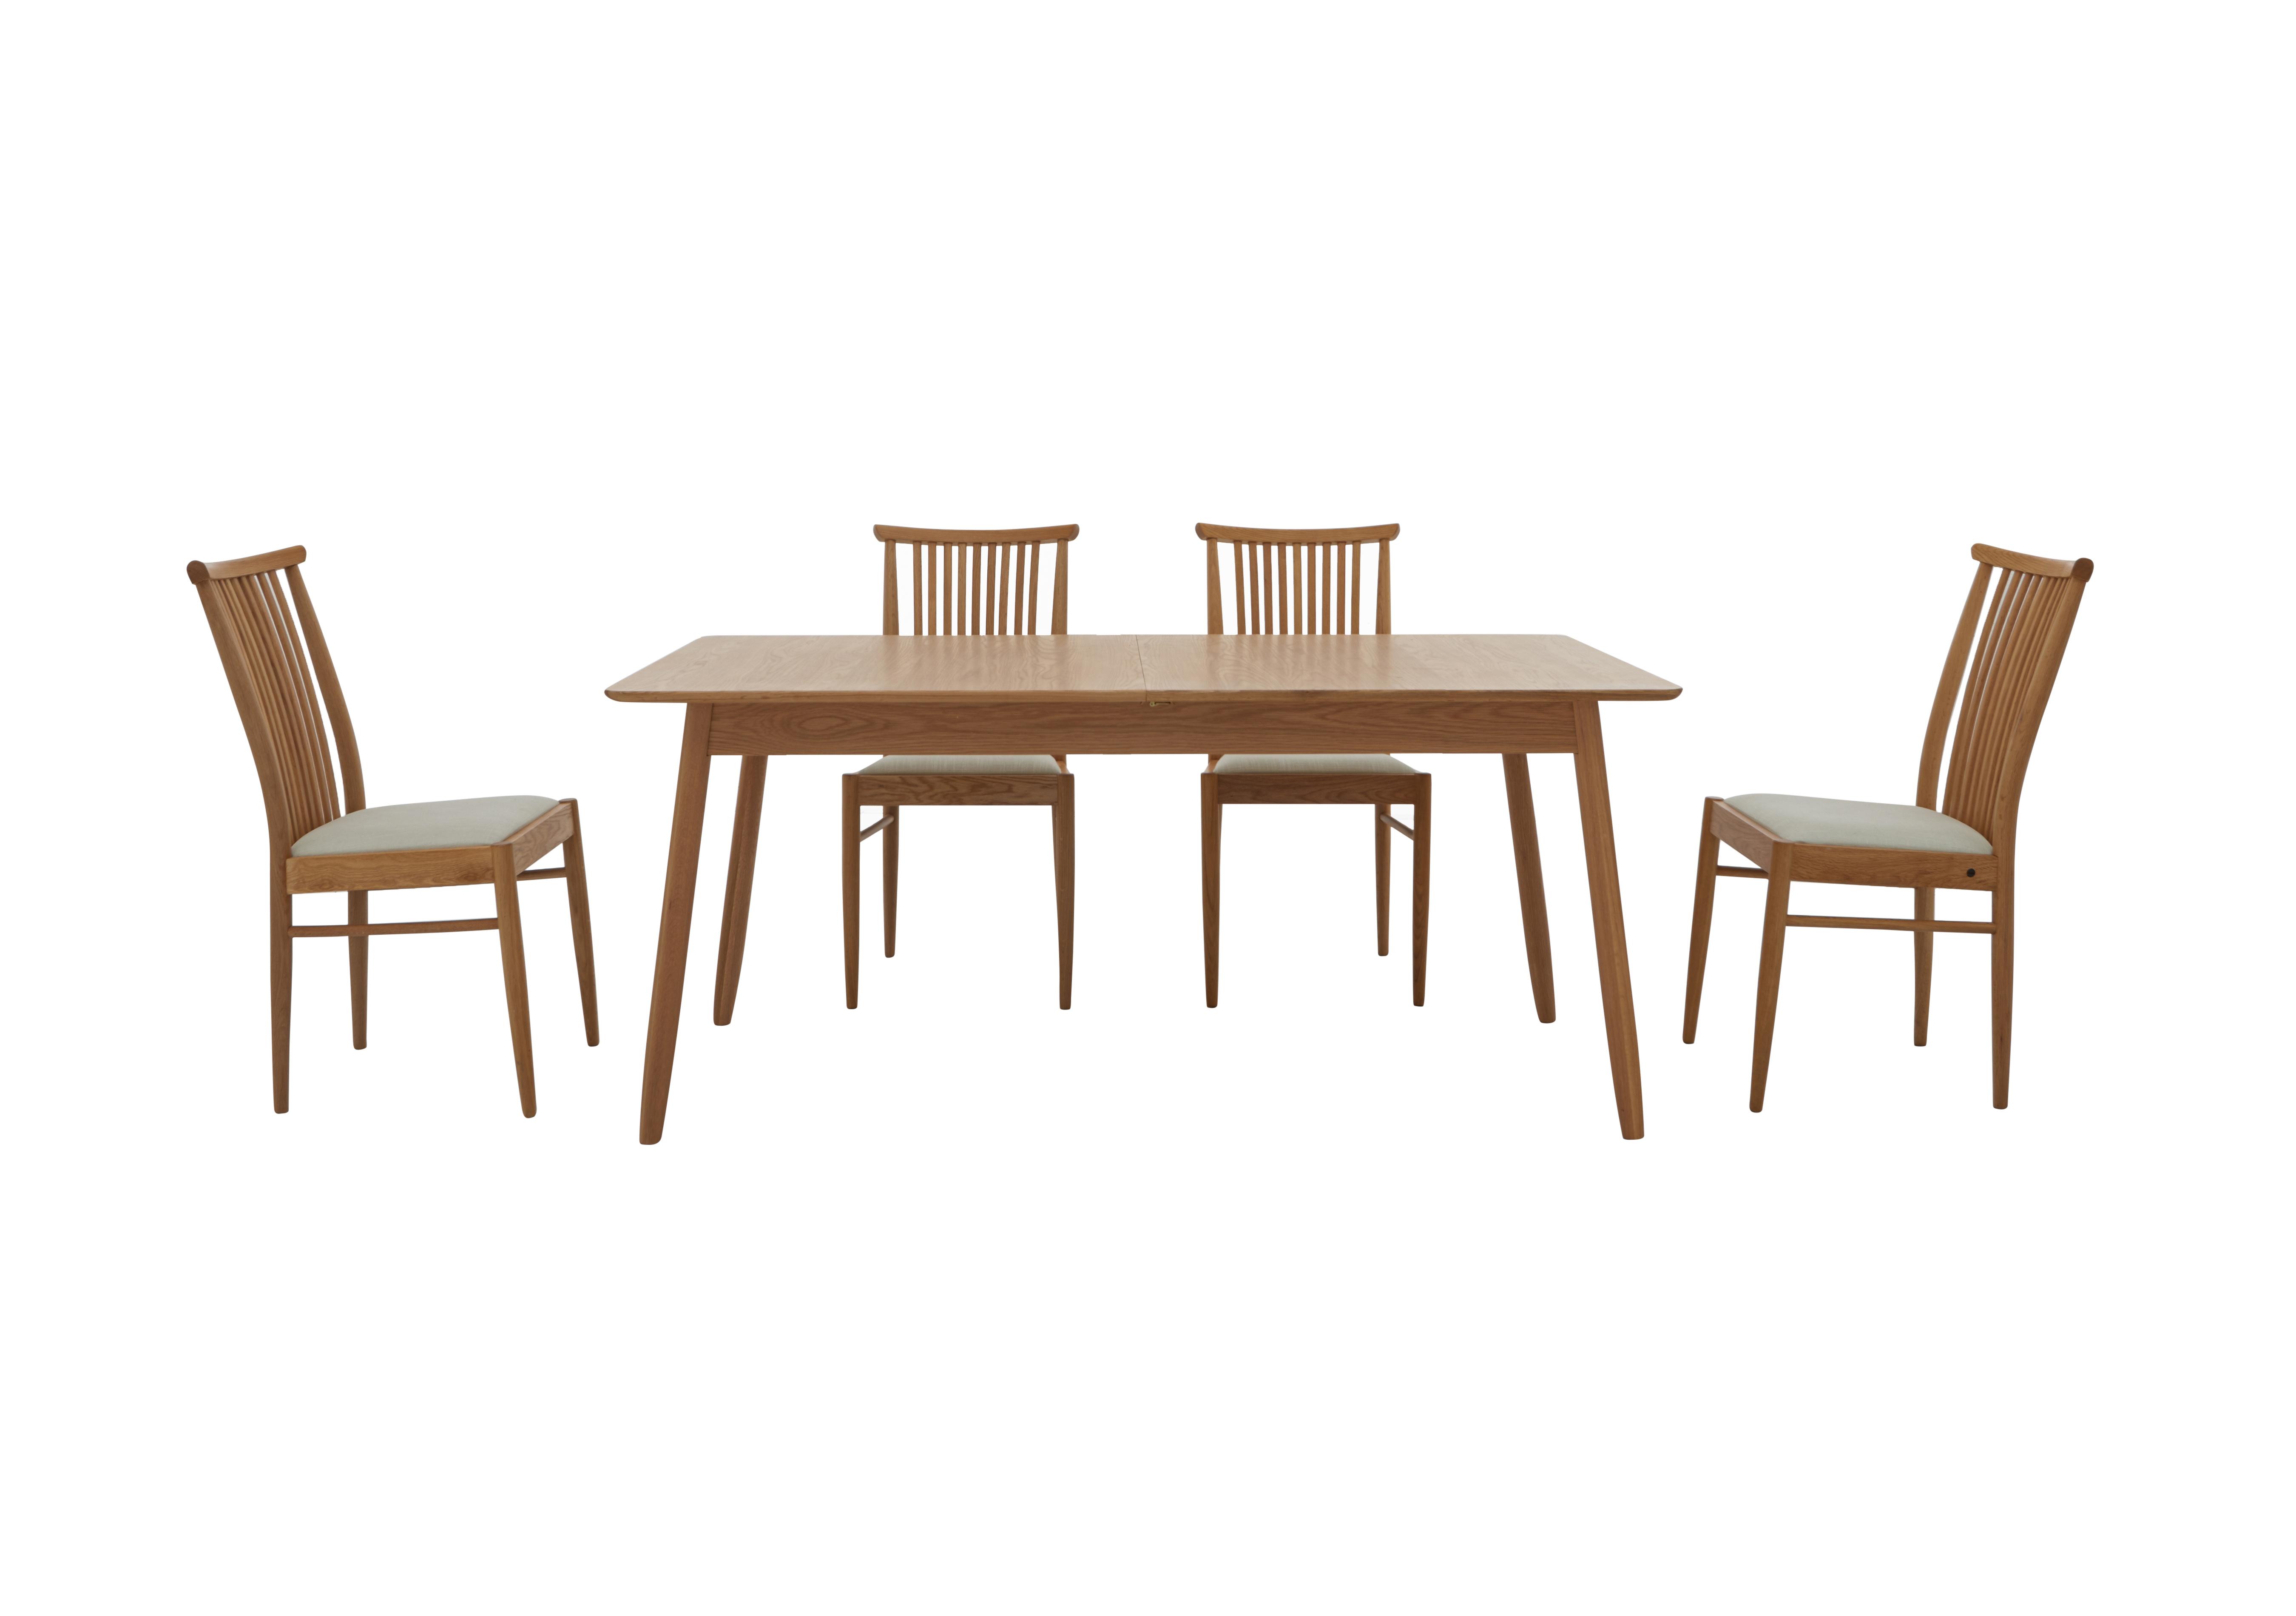 Teramo Medium Dining Table and 4 Slatted Chairs in  on Furniture Village